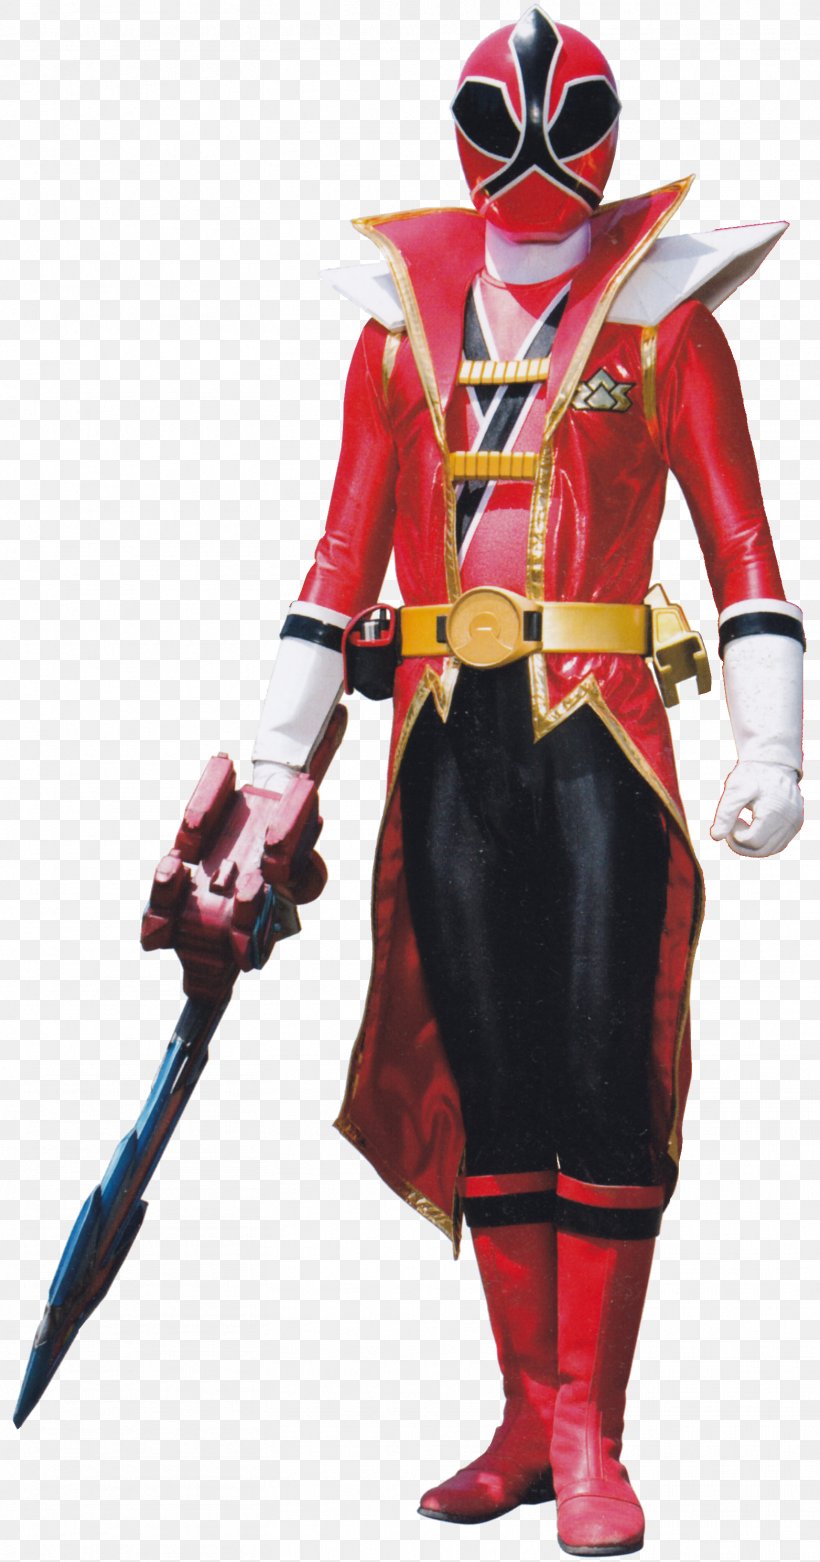 Billy Cranston Tommy Oliver Saban's Power Rangers Samurai Red Ranger Power Rangers Super Samurai, PNG, 1564x2980px, Billy Cranston, Action Figure, Costume, Costume Design, Fictional Character Download Free